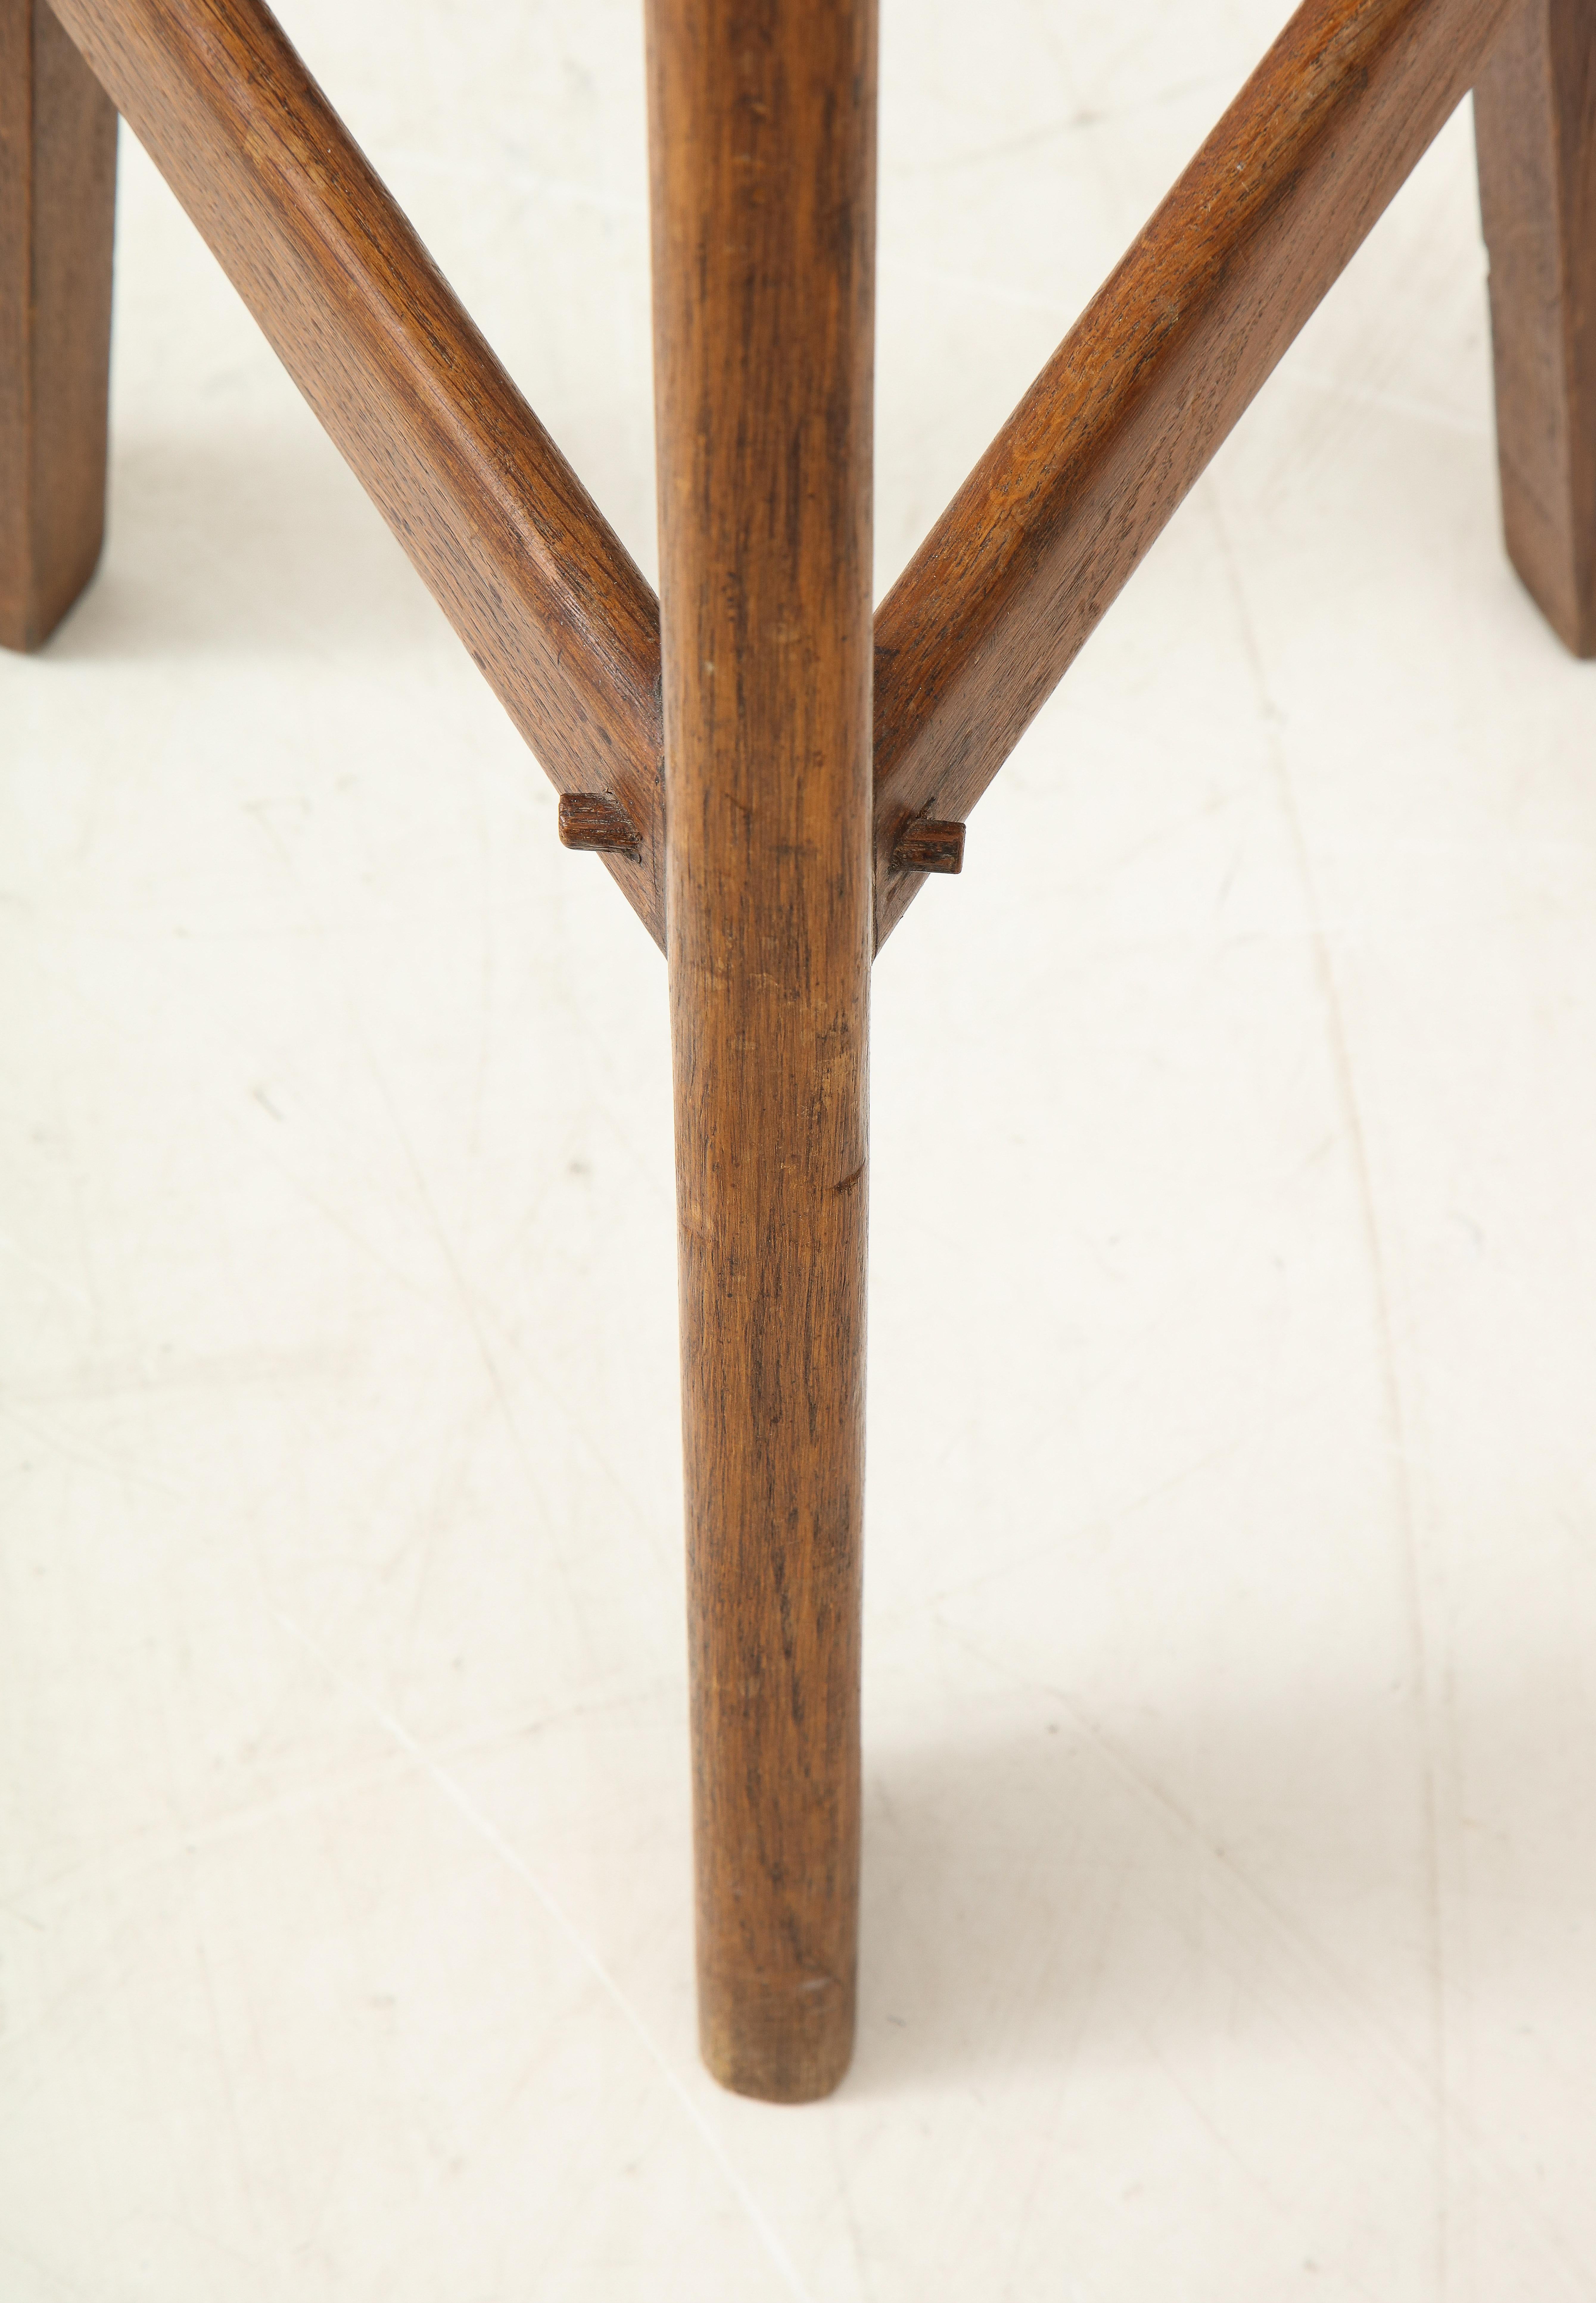 Pair of Midcentury Stools with Cowhide Seats, France, circa 1960 For Sale 1